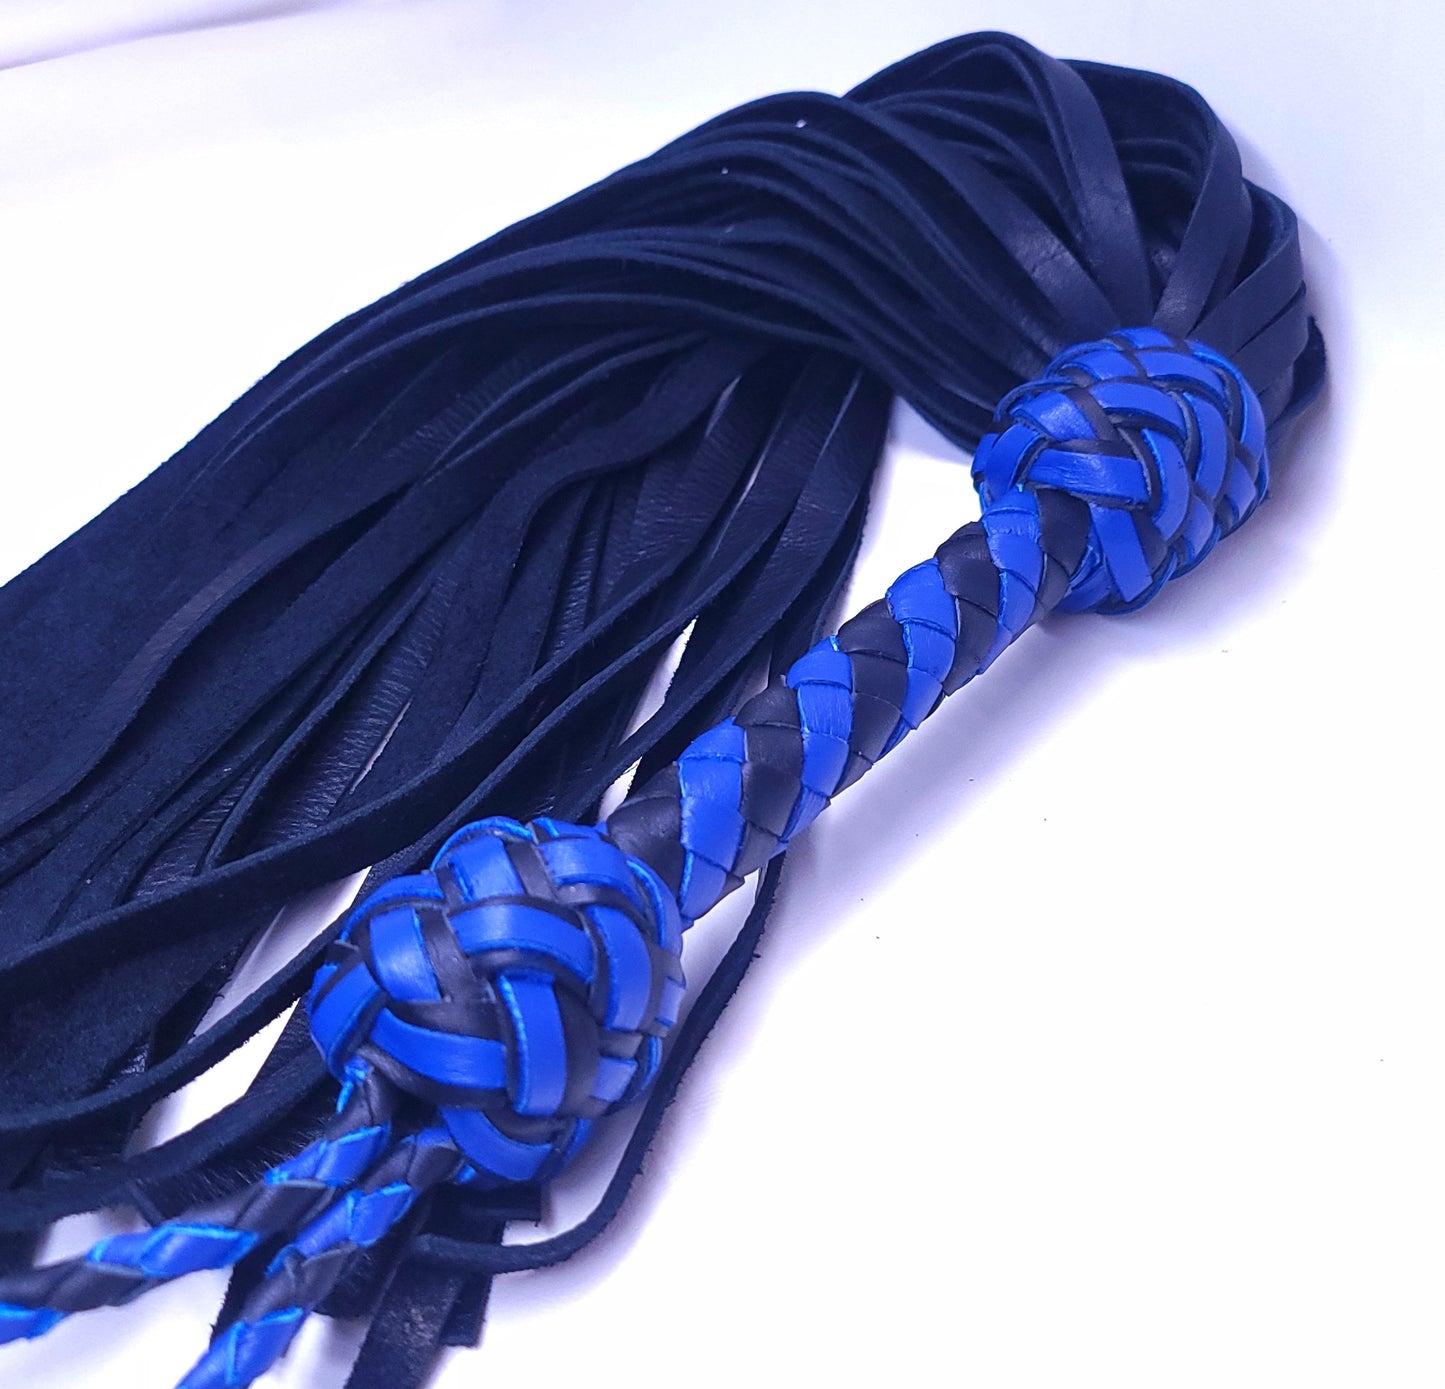 Black and Blue Bullhide Flogger- In stock